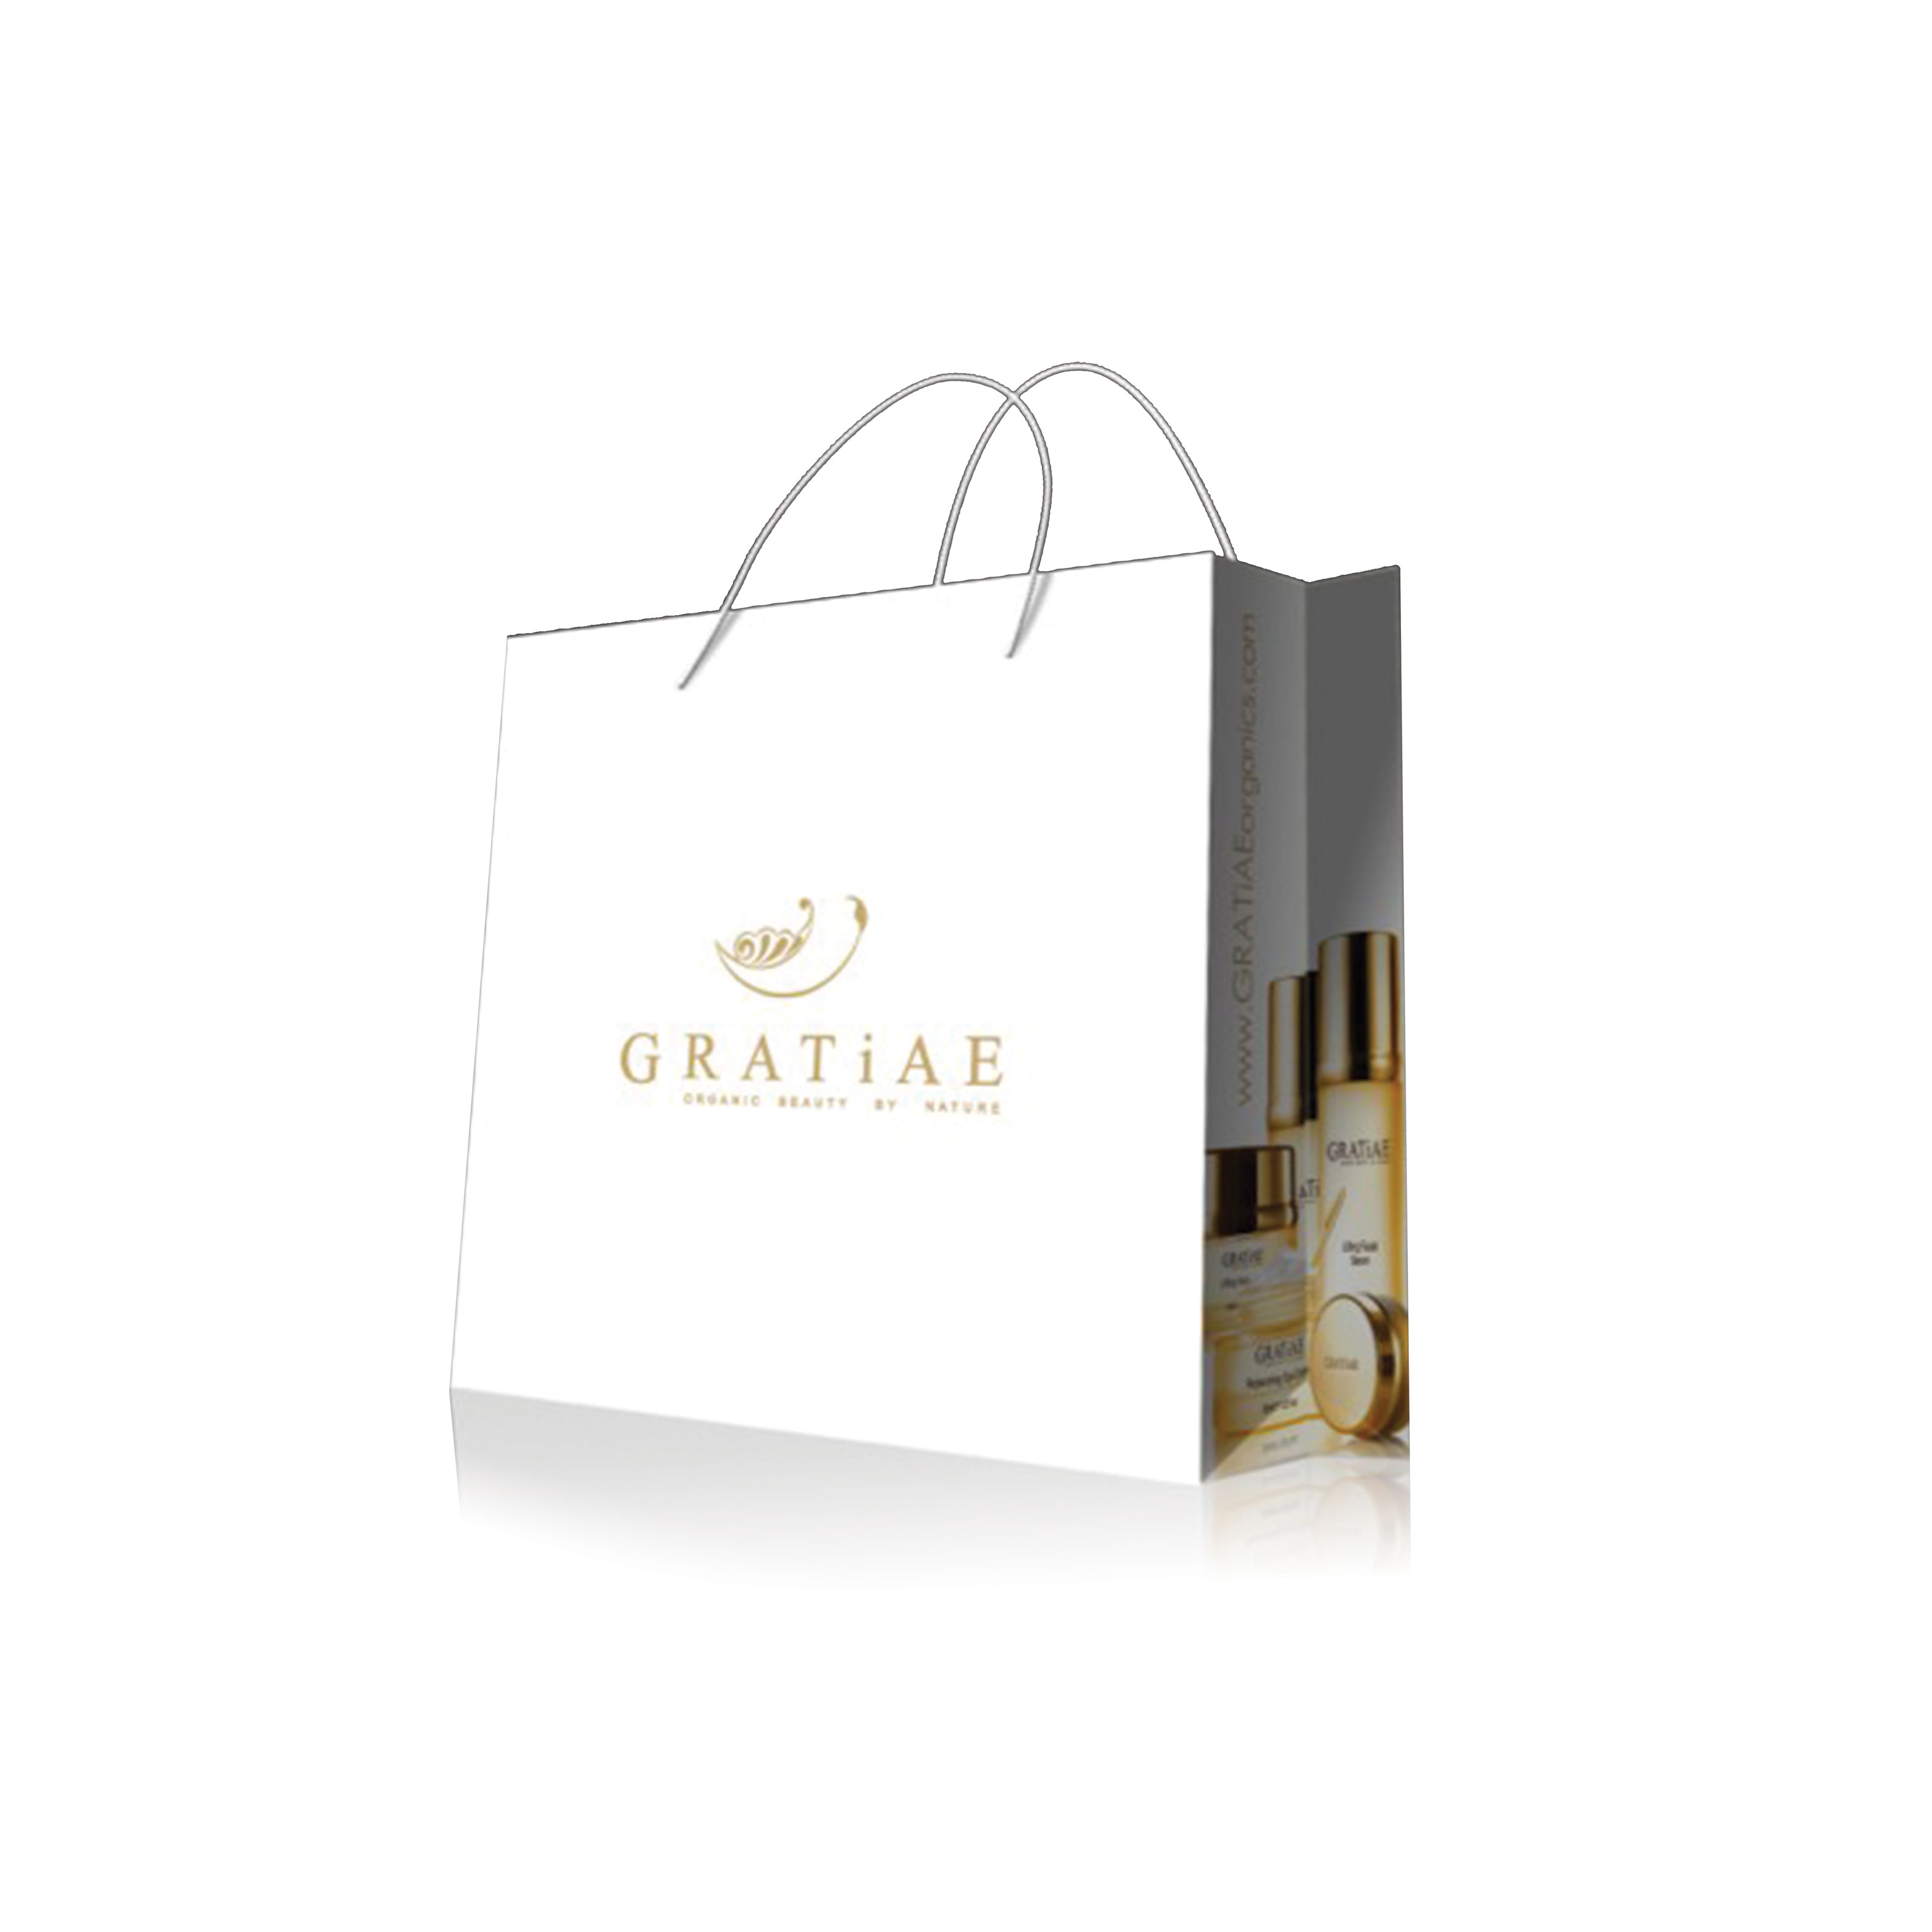 Sample of a shopping bag created for Premier Dead Sea Skin Care that shows images of the skin care bottles on the side.